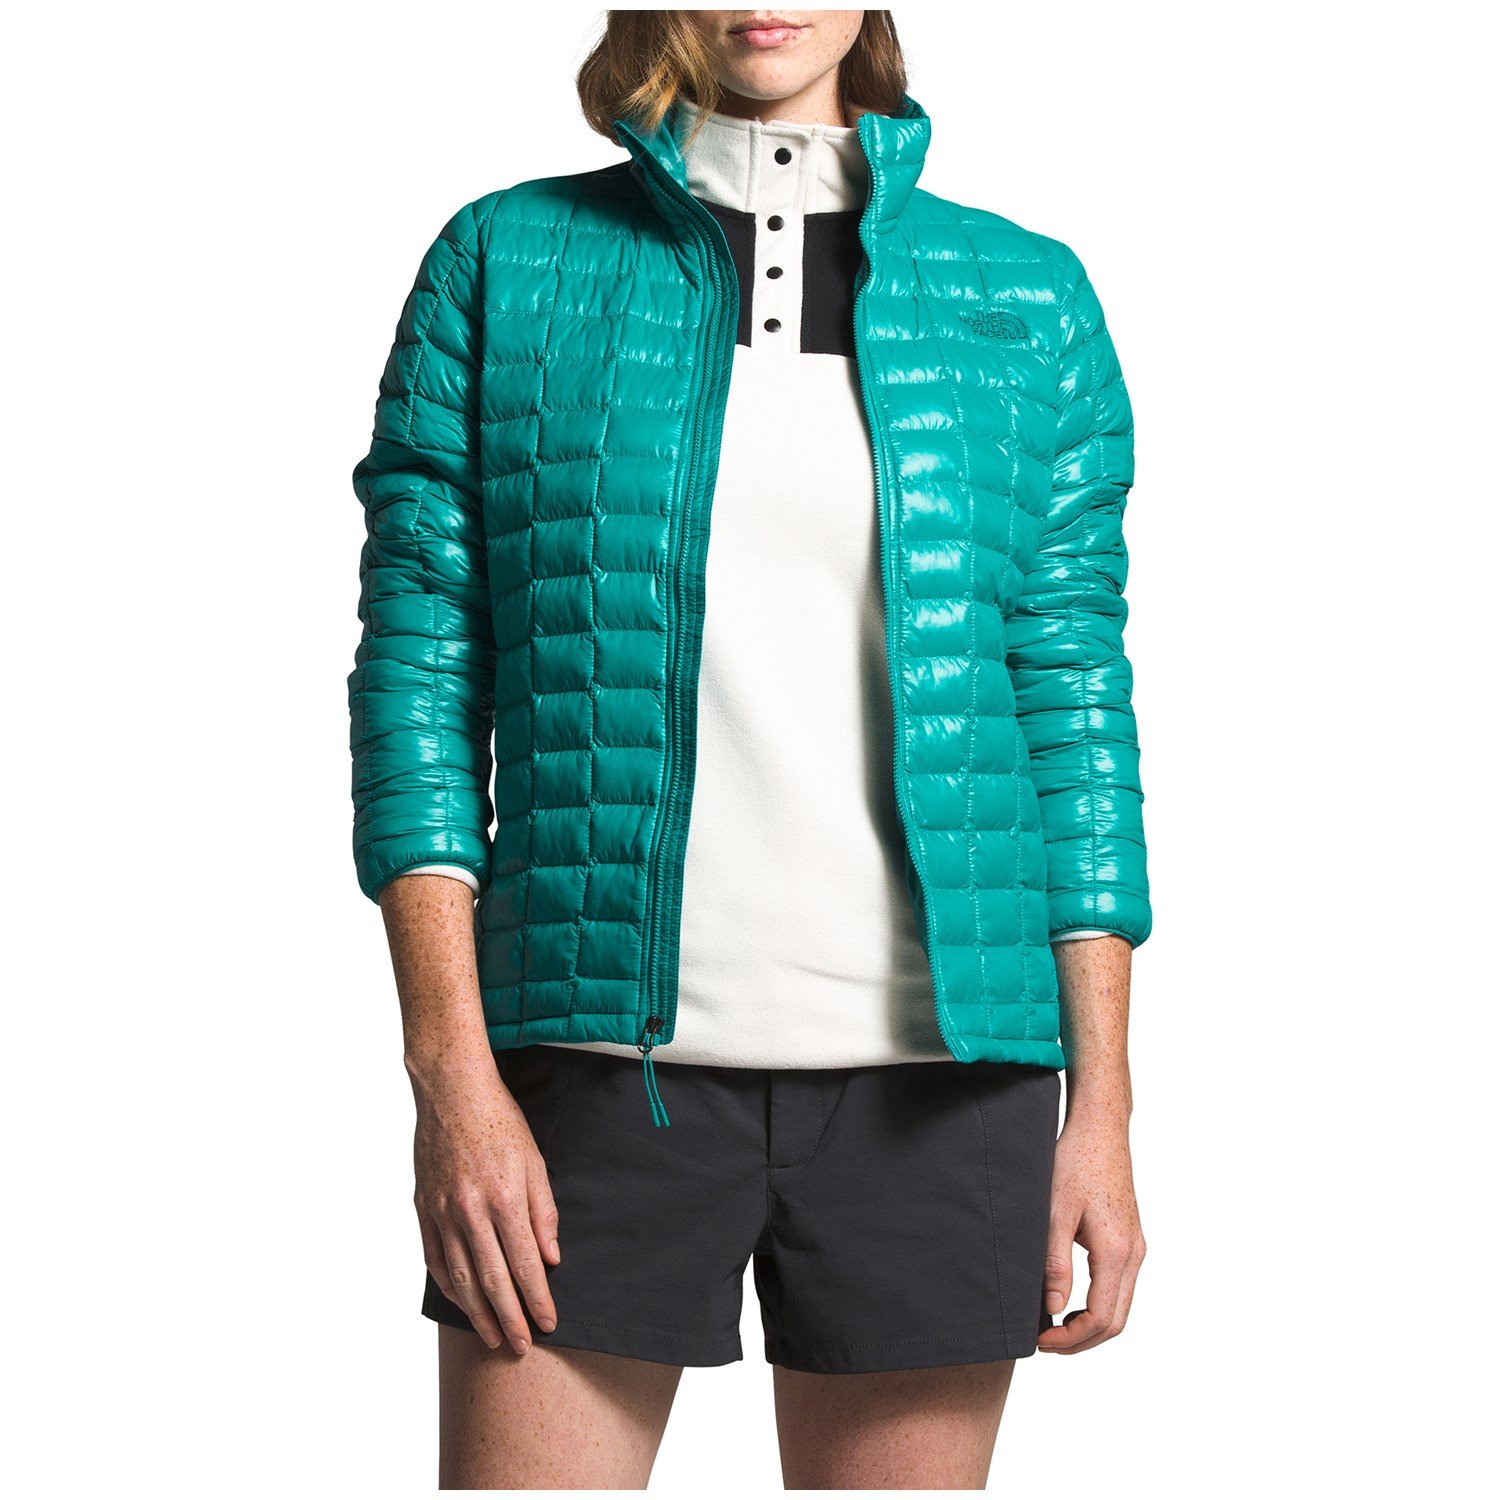 Siësta Bourgeon voorstel The North Face ThermoBall™ Eco Jacket - Women's | evo